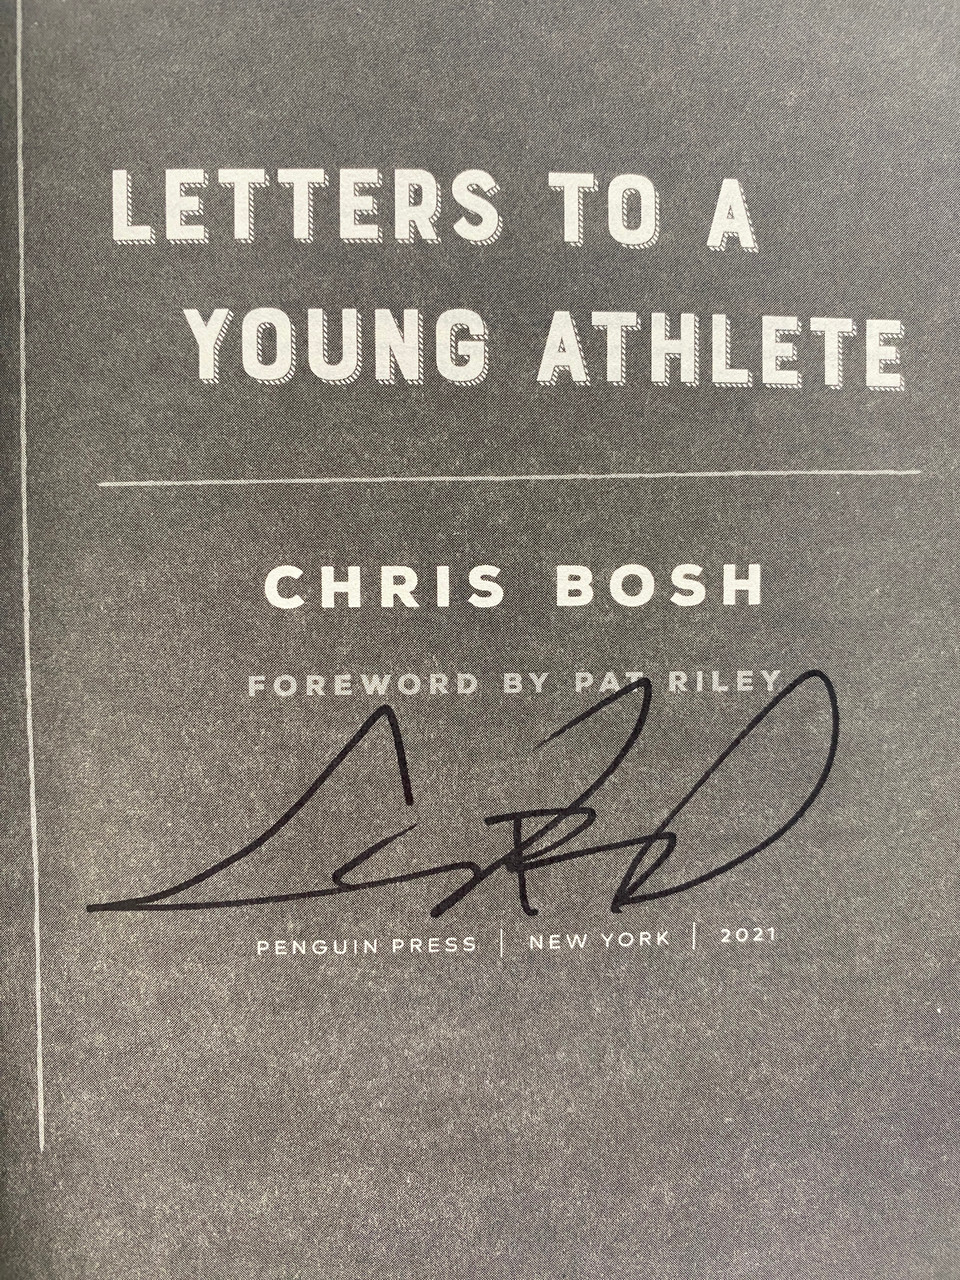 Letters to a Young Athlete by Chris Bosh: 9781984881809 |  : Books